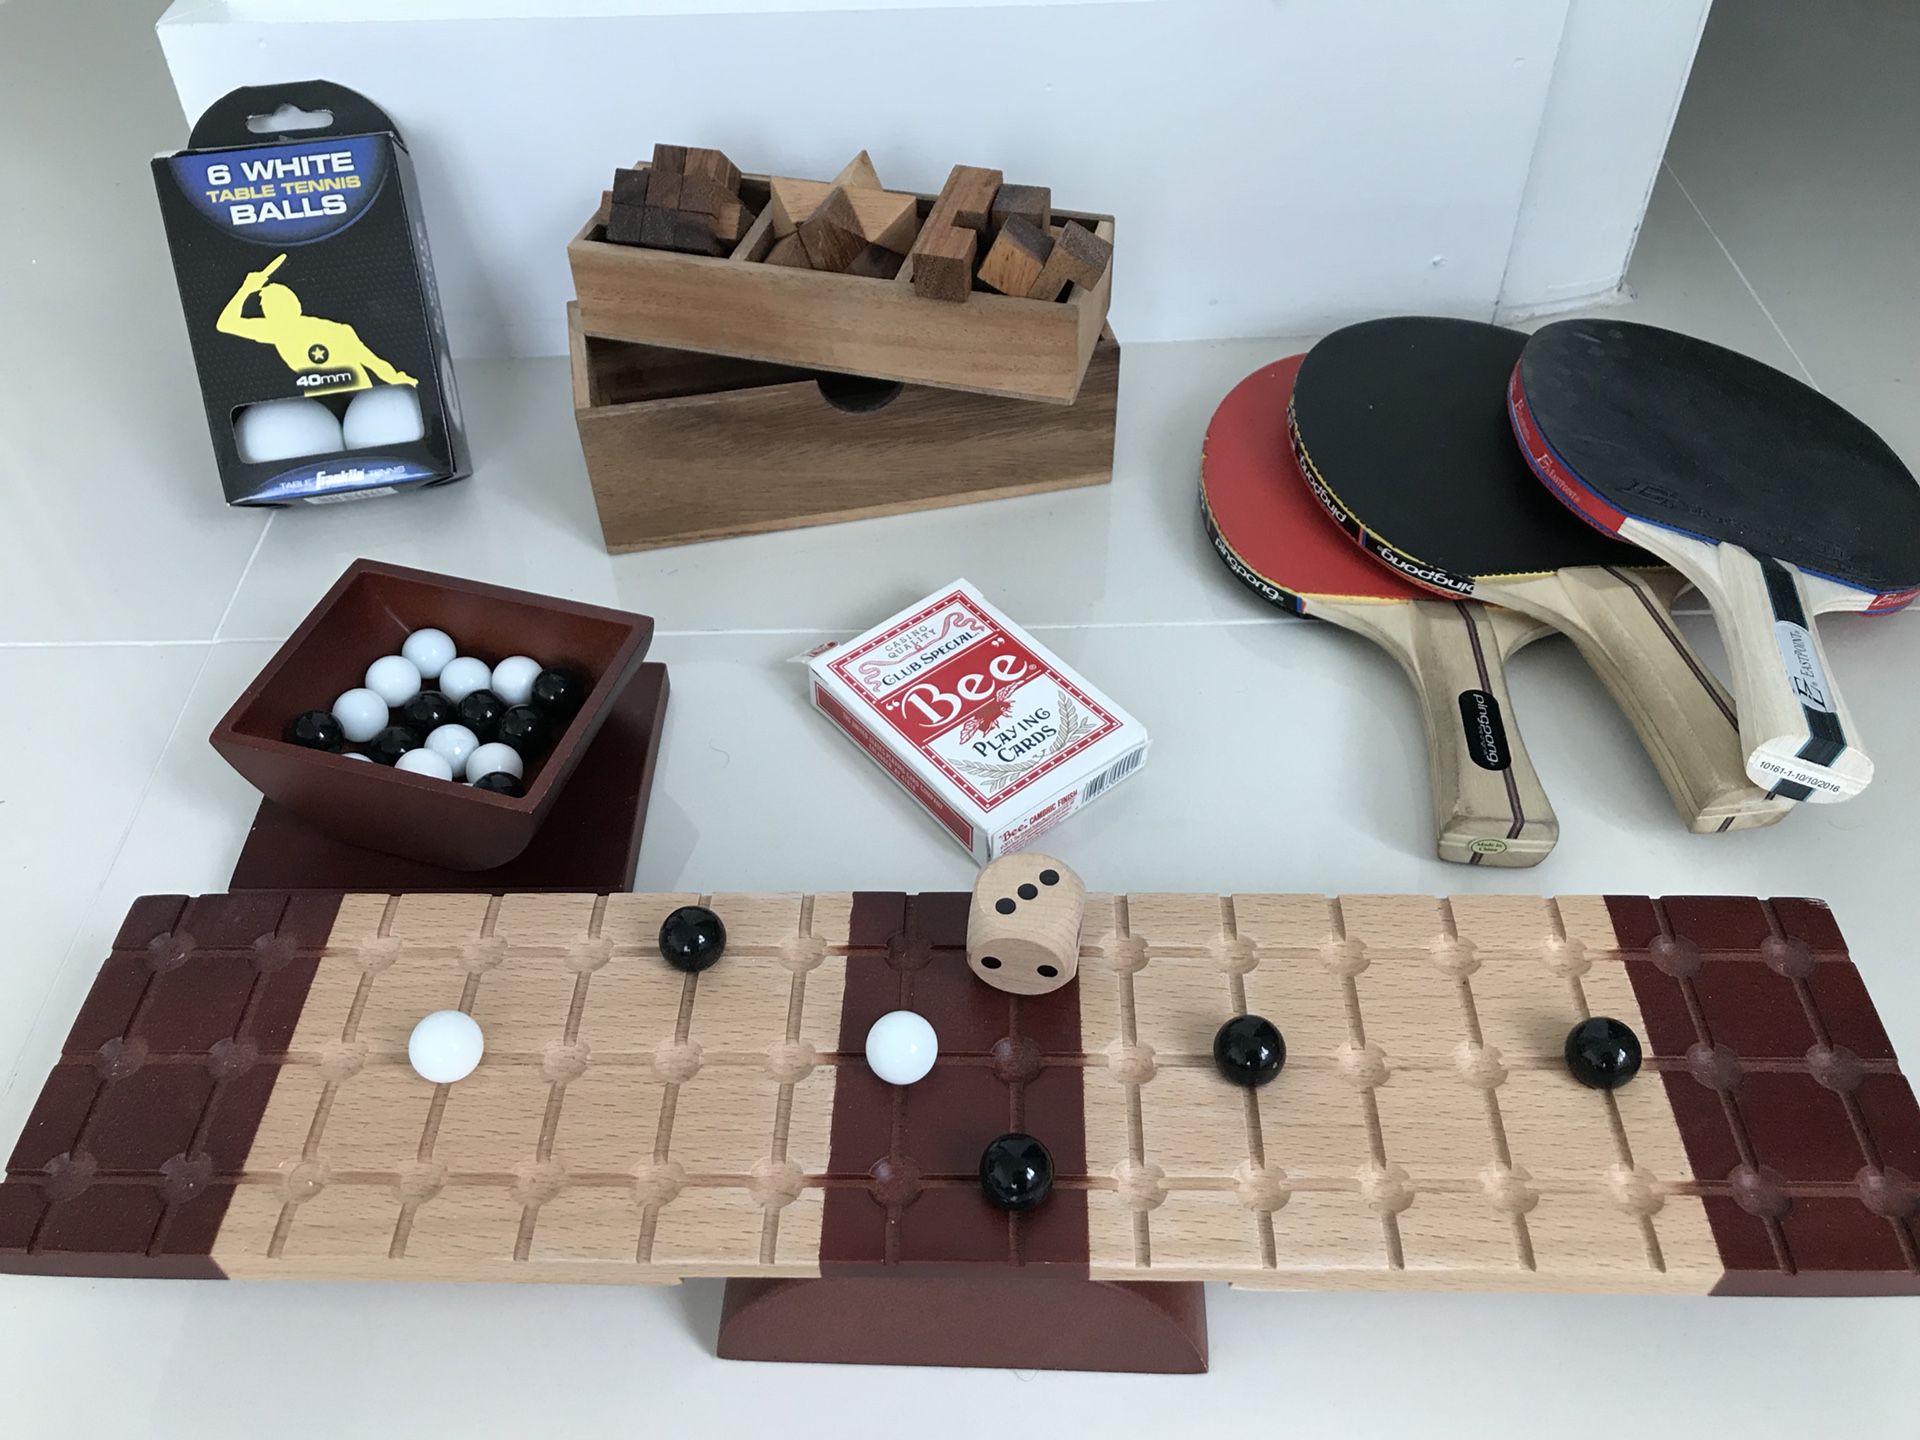 Wooden puzzles, playing cards, pin pong balls and paddles, marble game